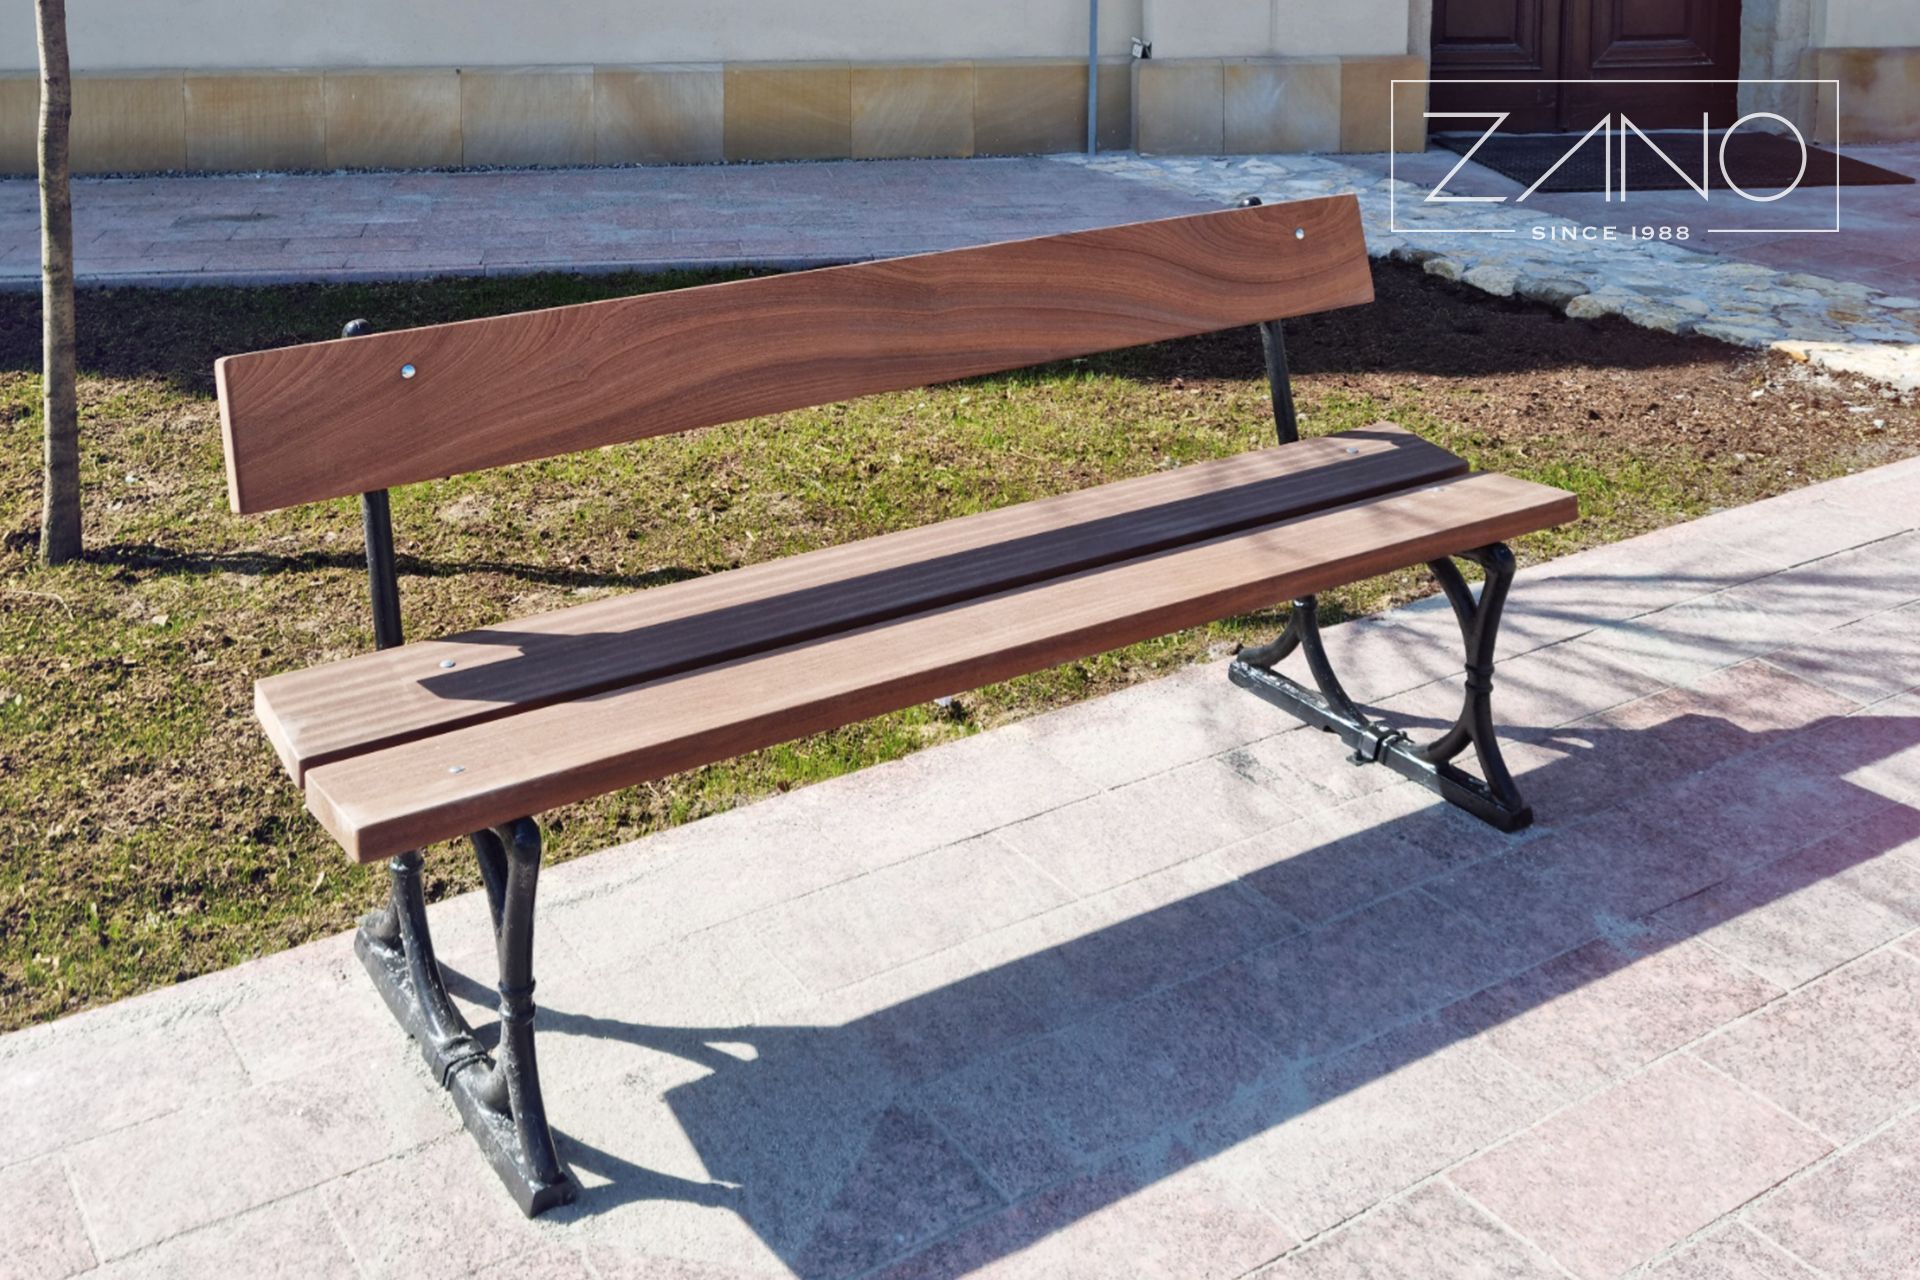 Retro style urban bench made of cast iron and lacquered wood